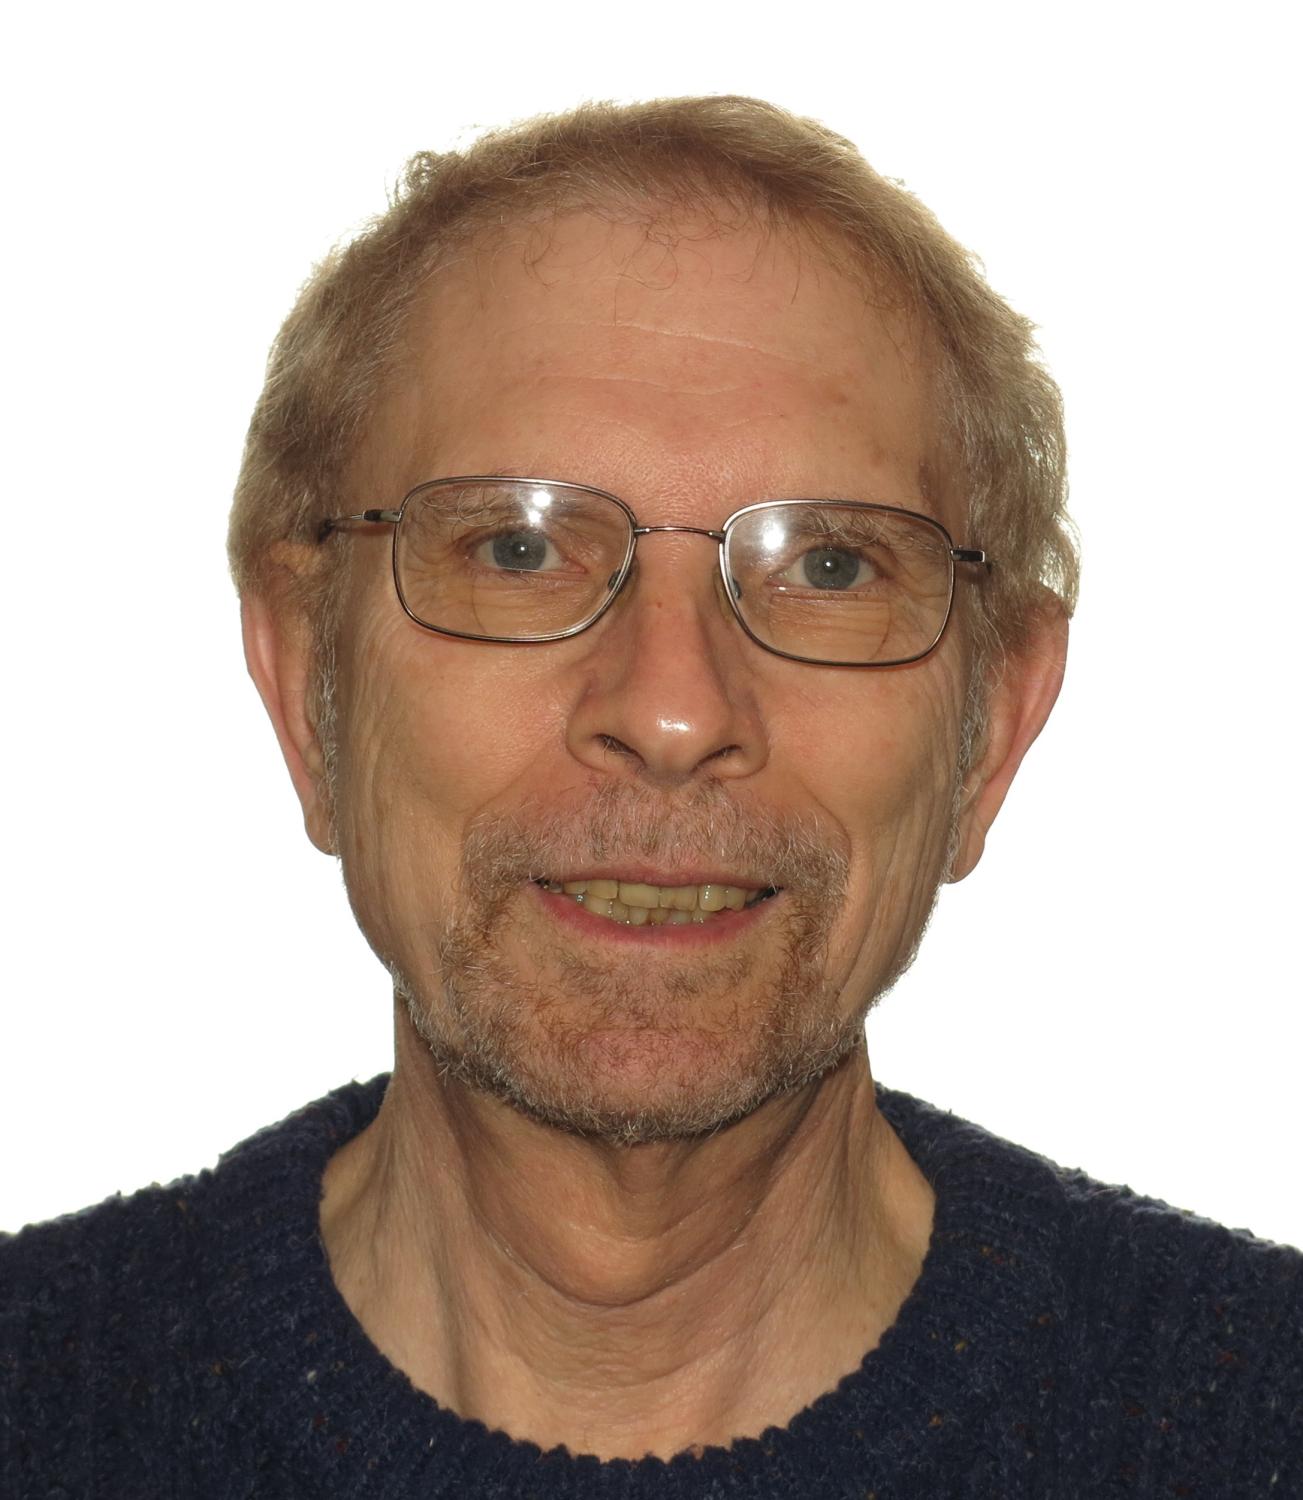 Frederick Newmeyer looks into the camera against a white background. He wears glasses and a black shirt.